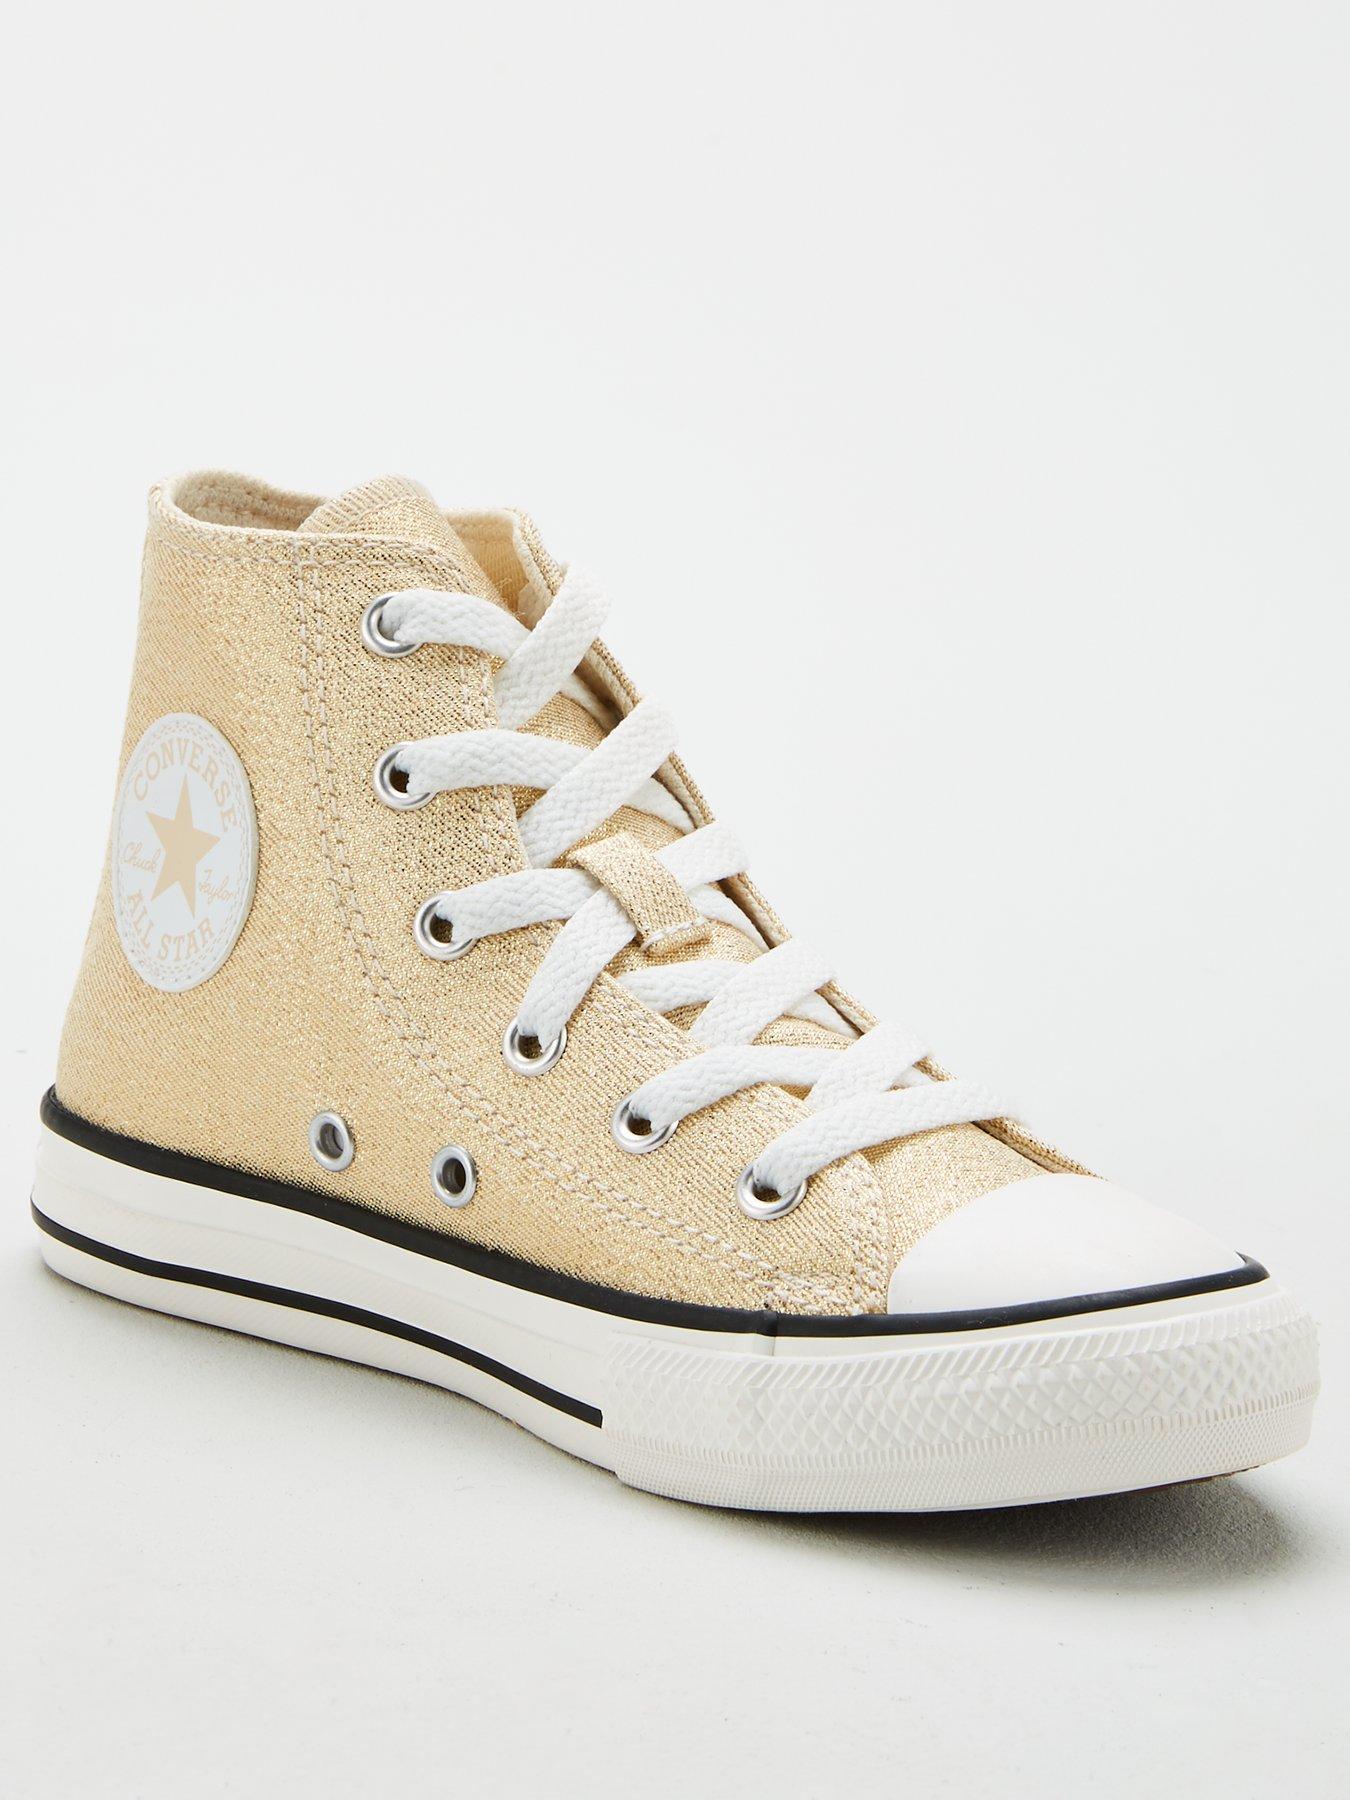 Converse Childrens Chuck Taylor All Star Hi Sparkle Trainers - Gold |  very.co.uk